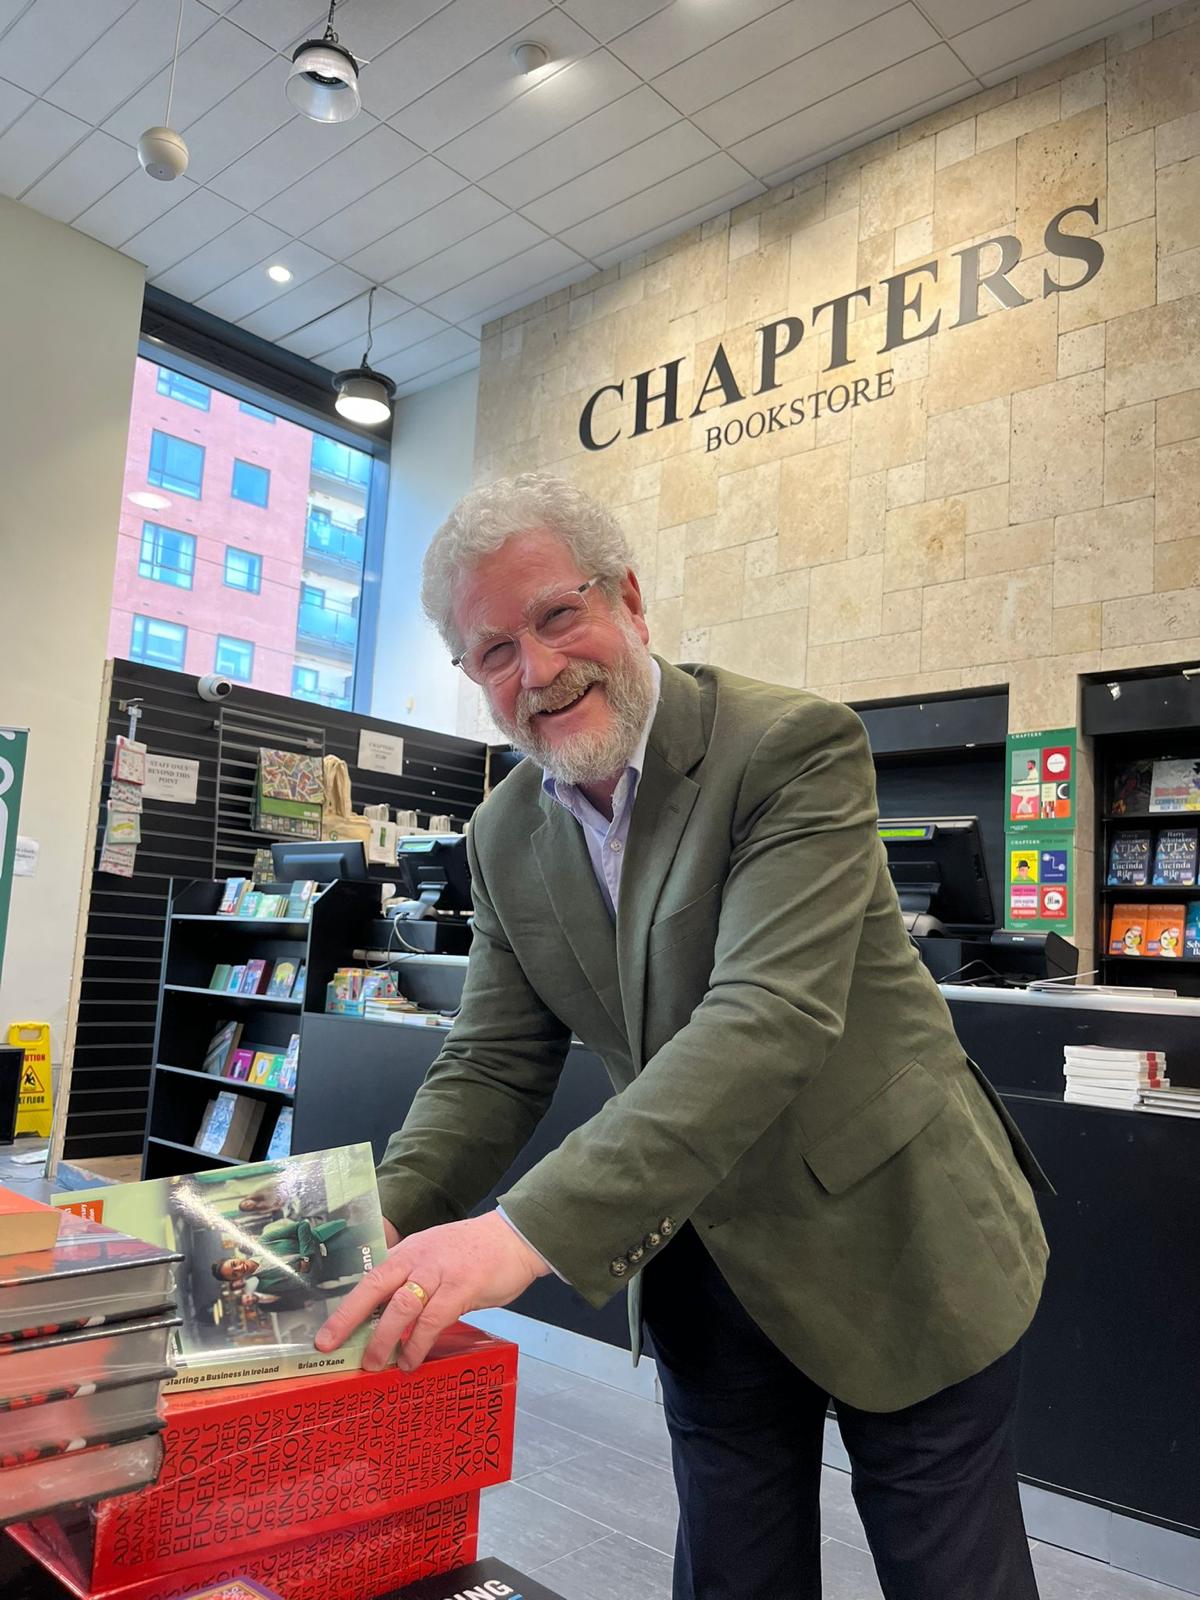 Chapters Bookstore Starting a Business in Ireland (8th edition)